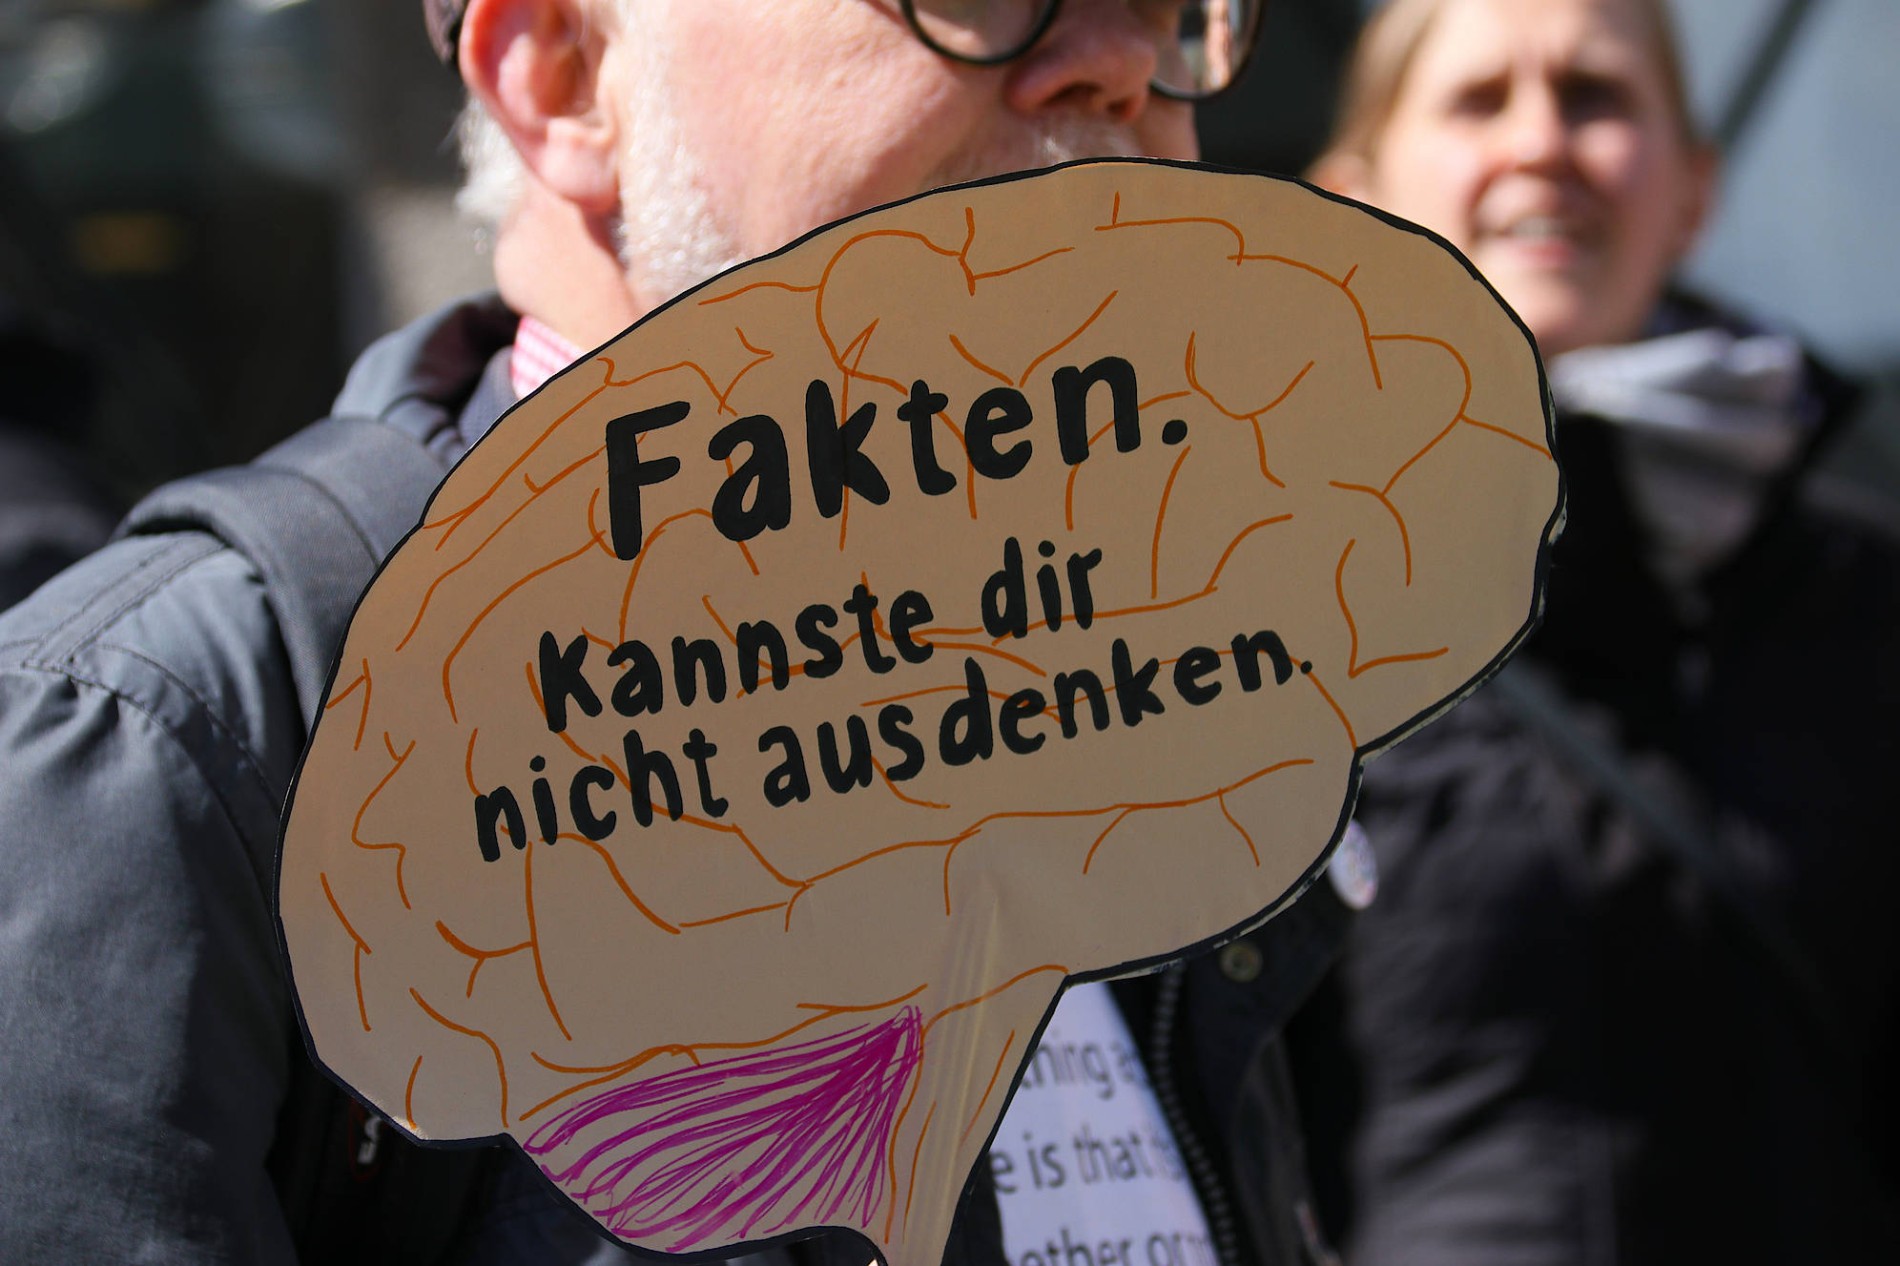 March for Science, Frankfurt am Main,<br>22. April 2017